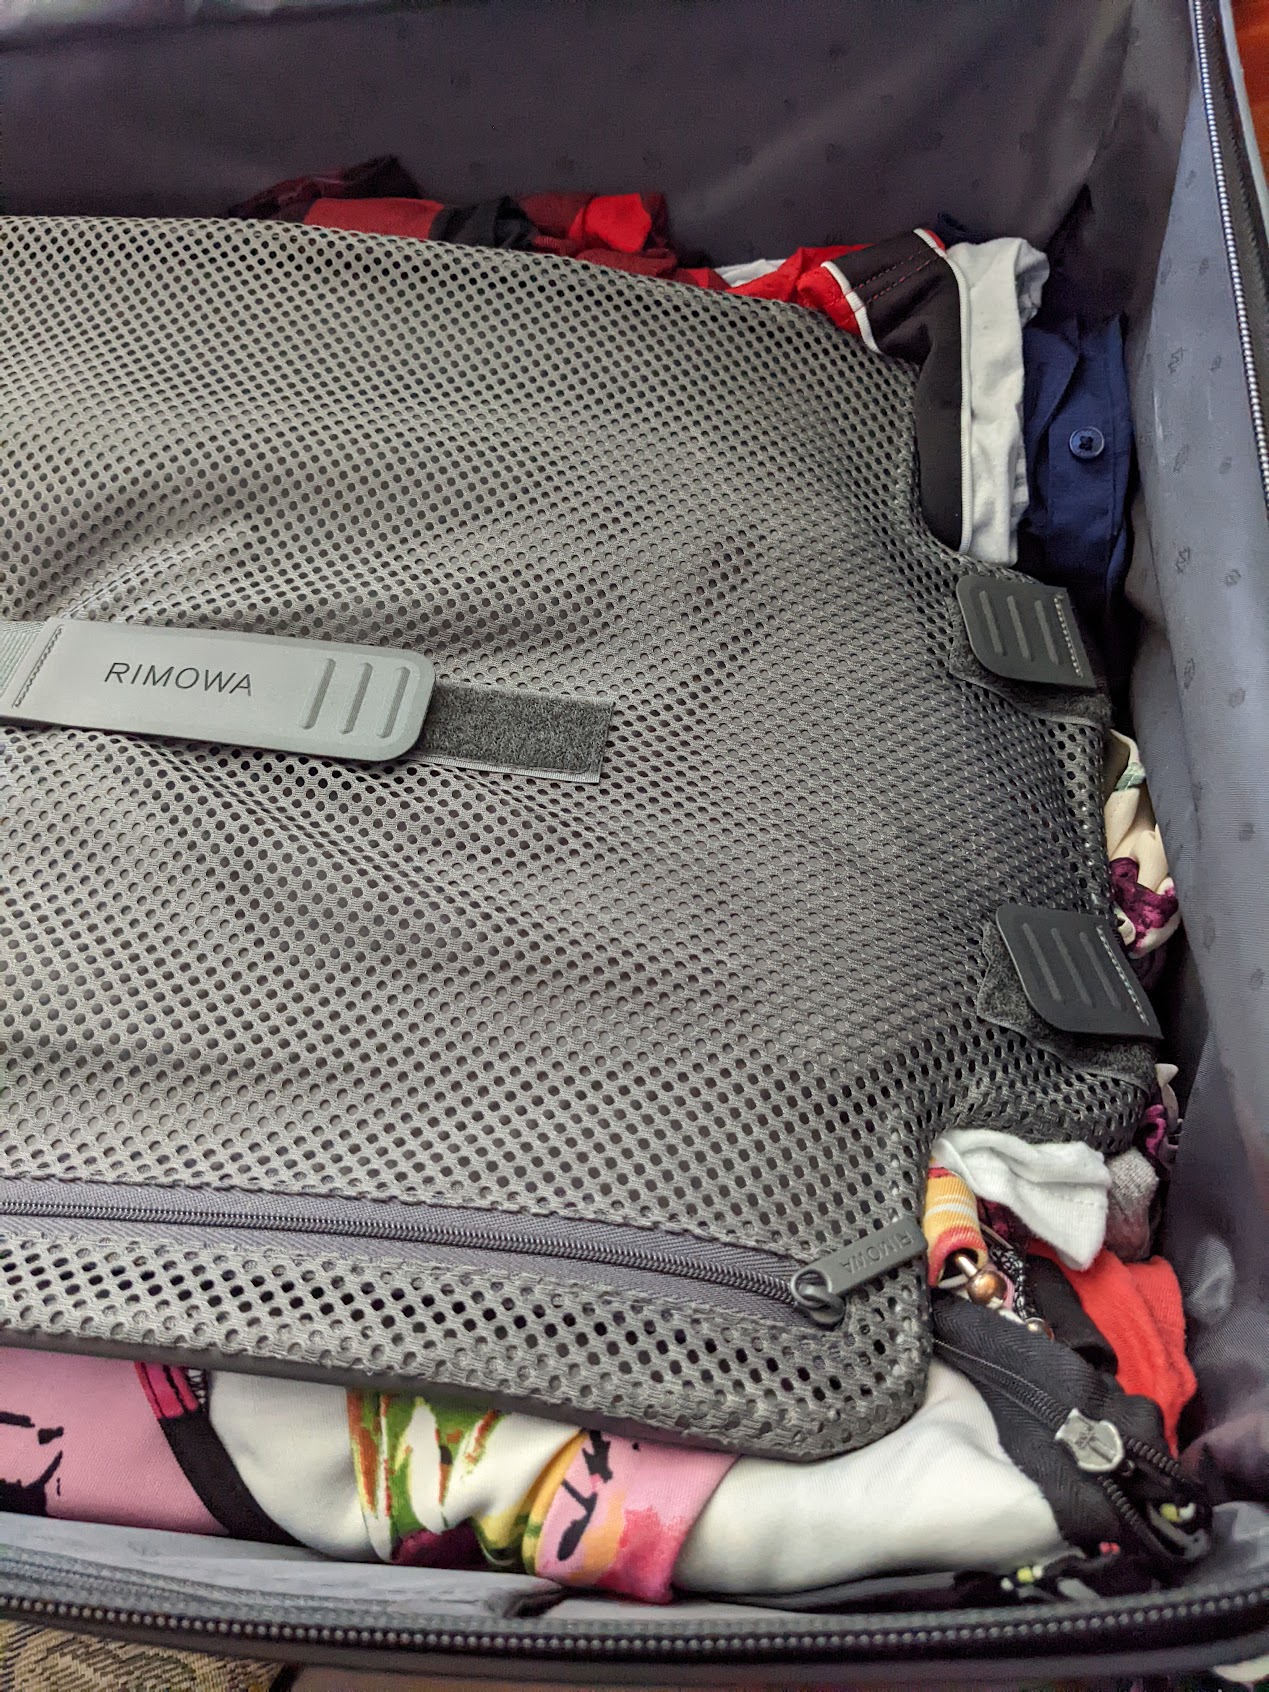 4K Review: Rimowa original Check-In L / how much damage did the